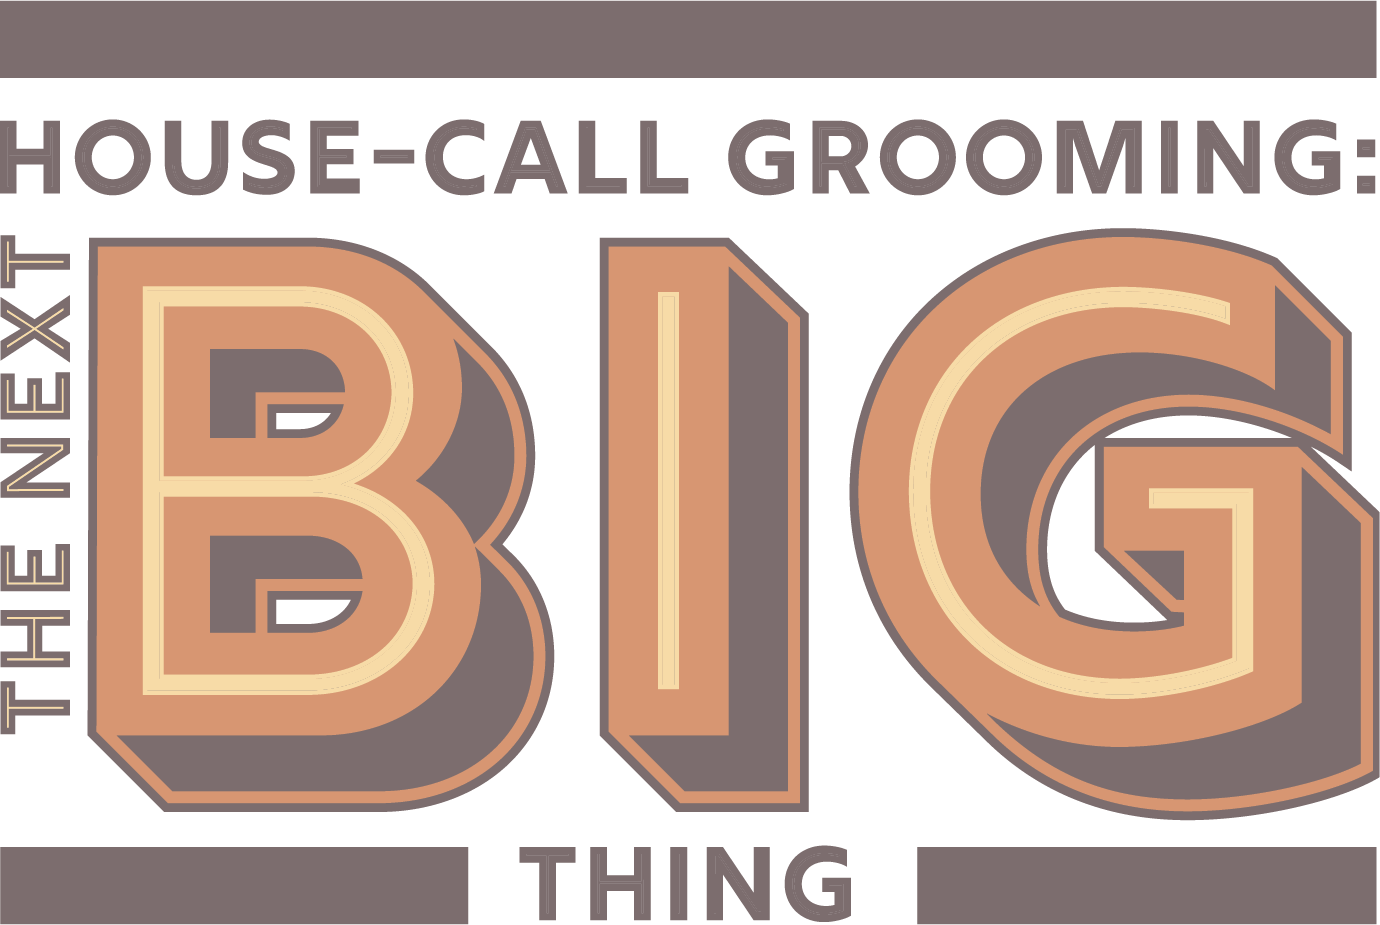 The Next Big Thing: House-Call Grooming